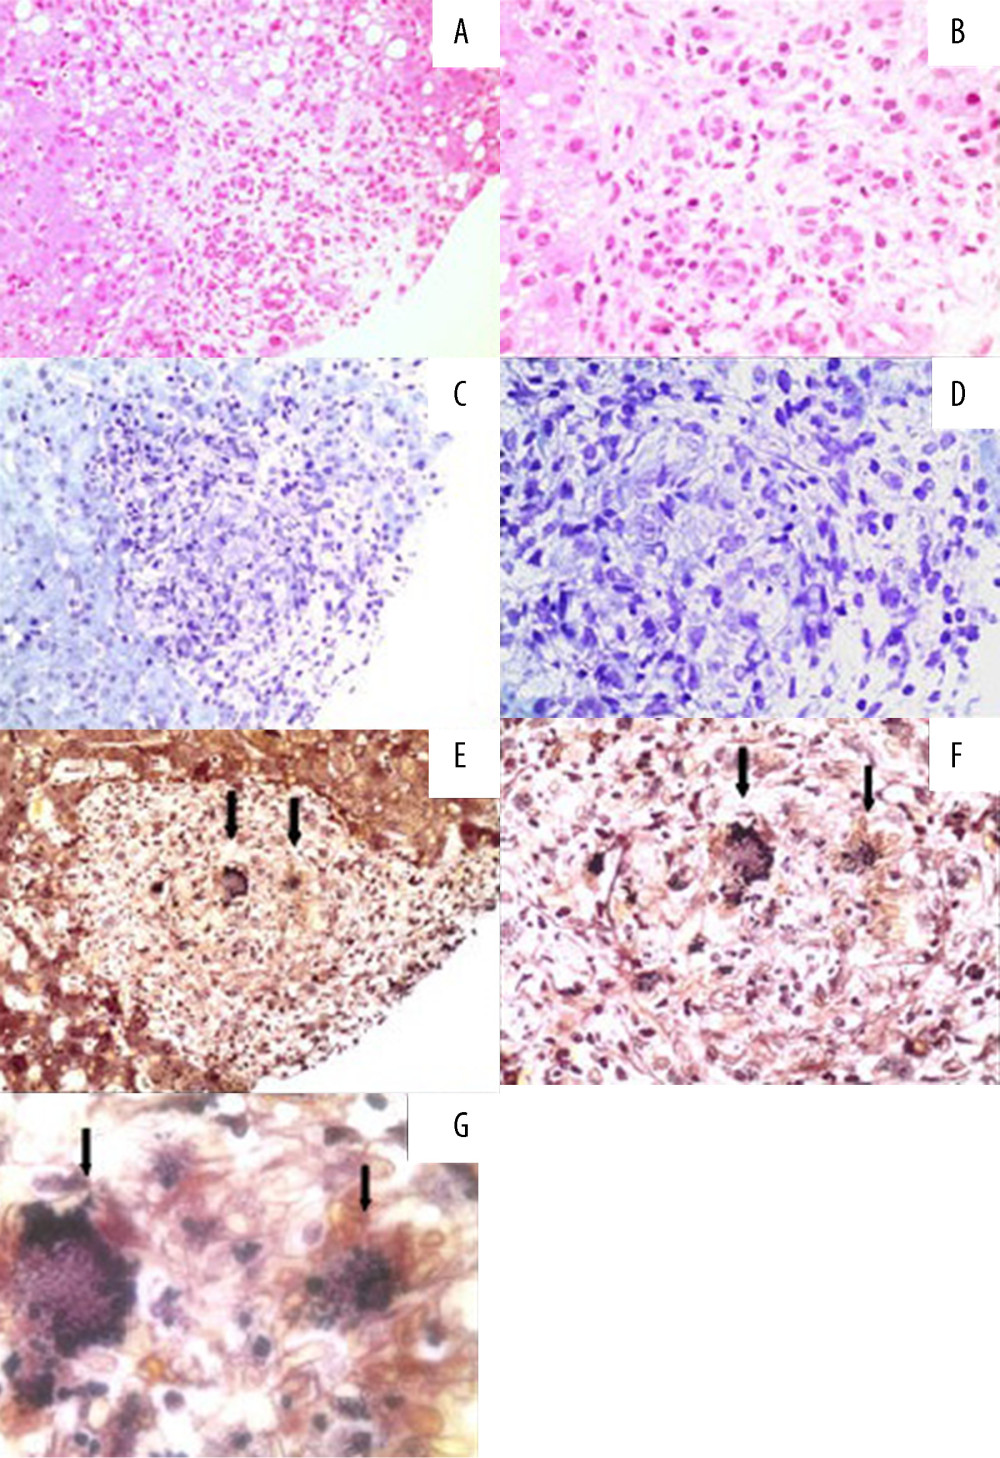 (A, B) Granulomatous inflammation in the liver, with the presence of clustered macrophages (H&E, 20 and 40×, magnification, respectively). (C, D) Absence of acid-fast bacilli in granulomas (Ziehl-Neelsen, 20 and 40×, magnification, respectively). (E–G) Presence of small rounded, birefringent, and clustered structures (Gomori-Methanamine-Silver, 20, 40 and 100×, magnification, respectively).